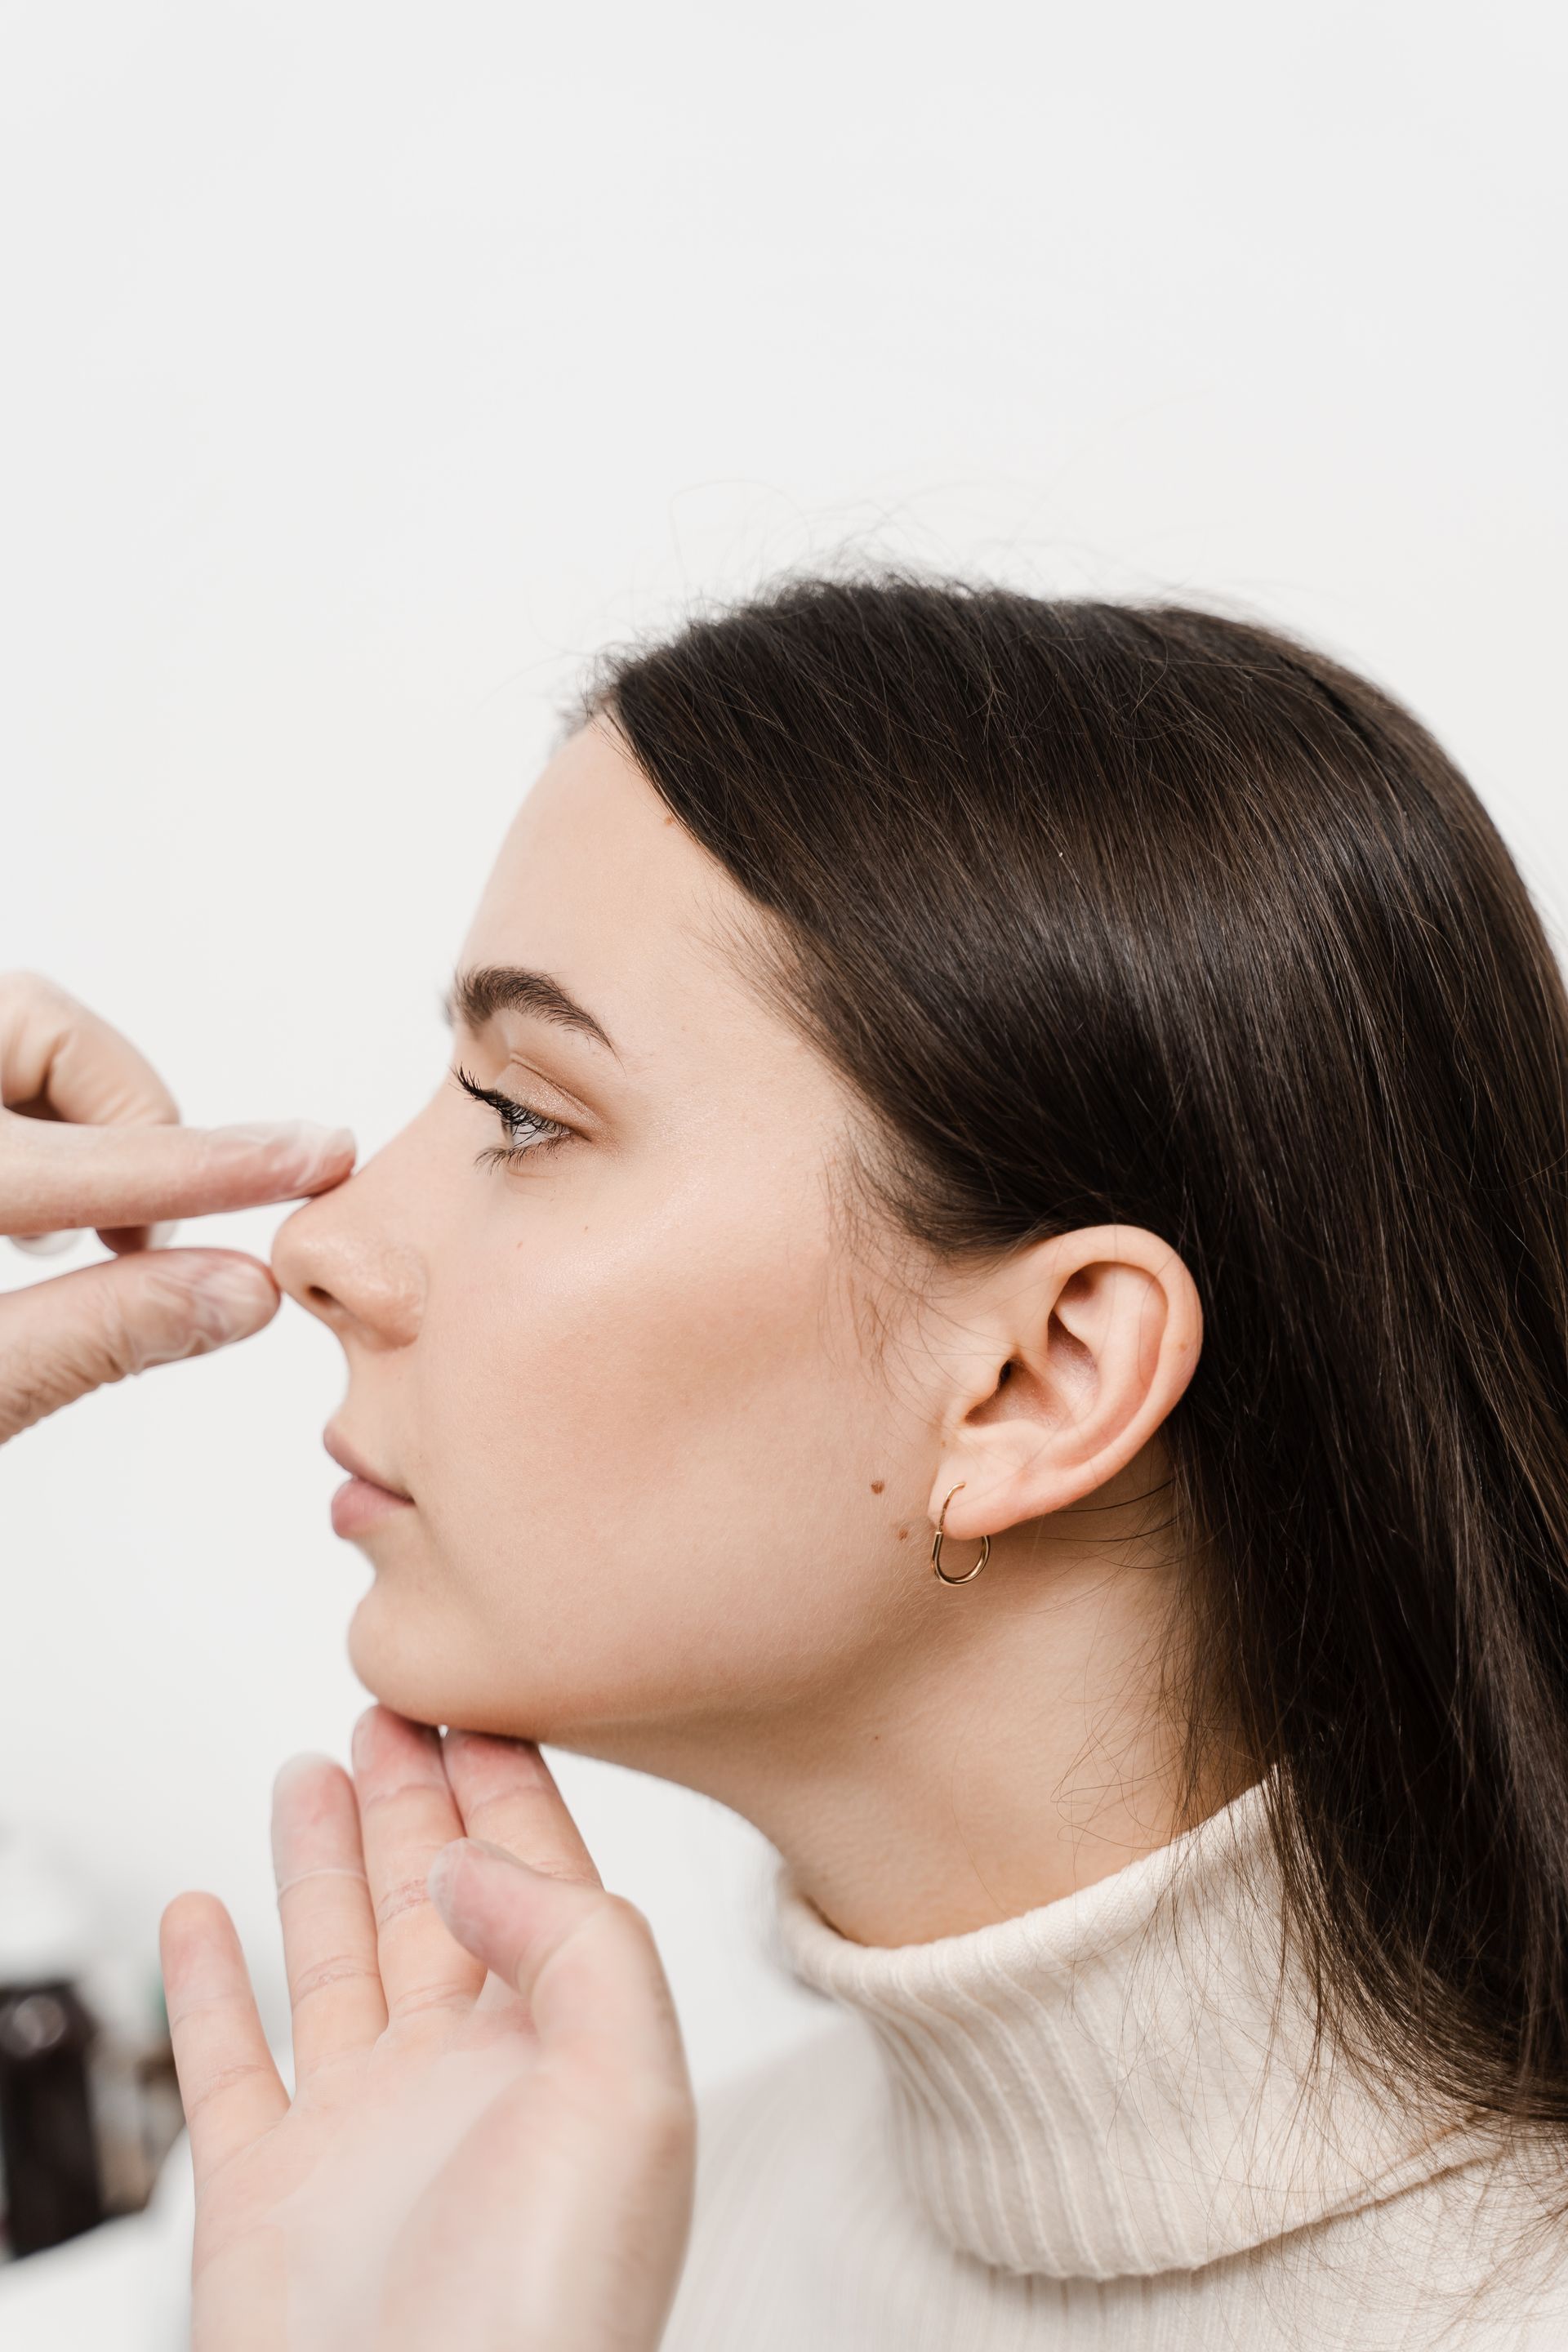 a woman is getting her nose examined by a doctor